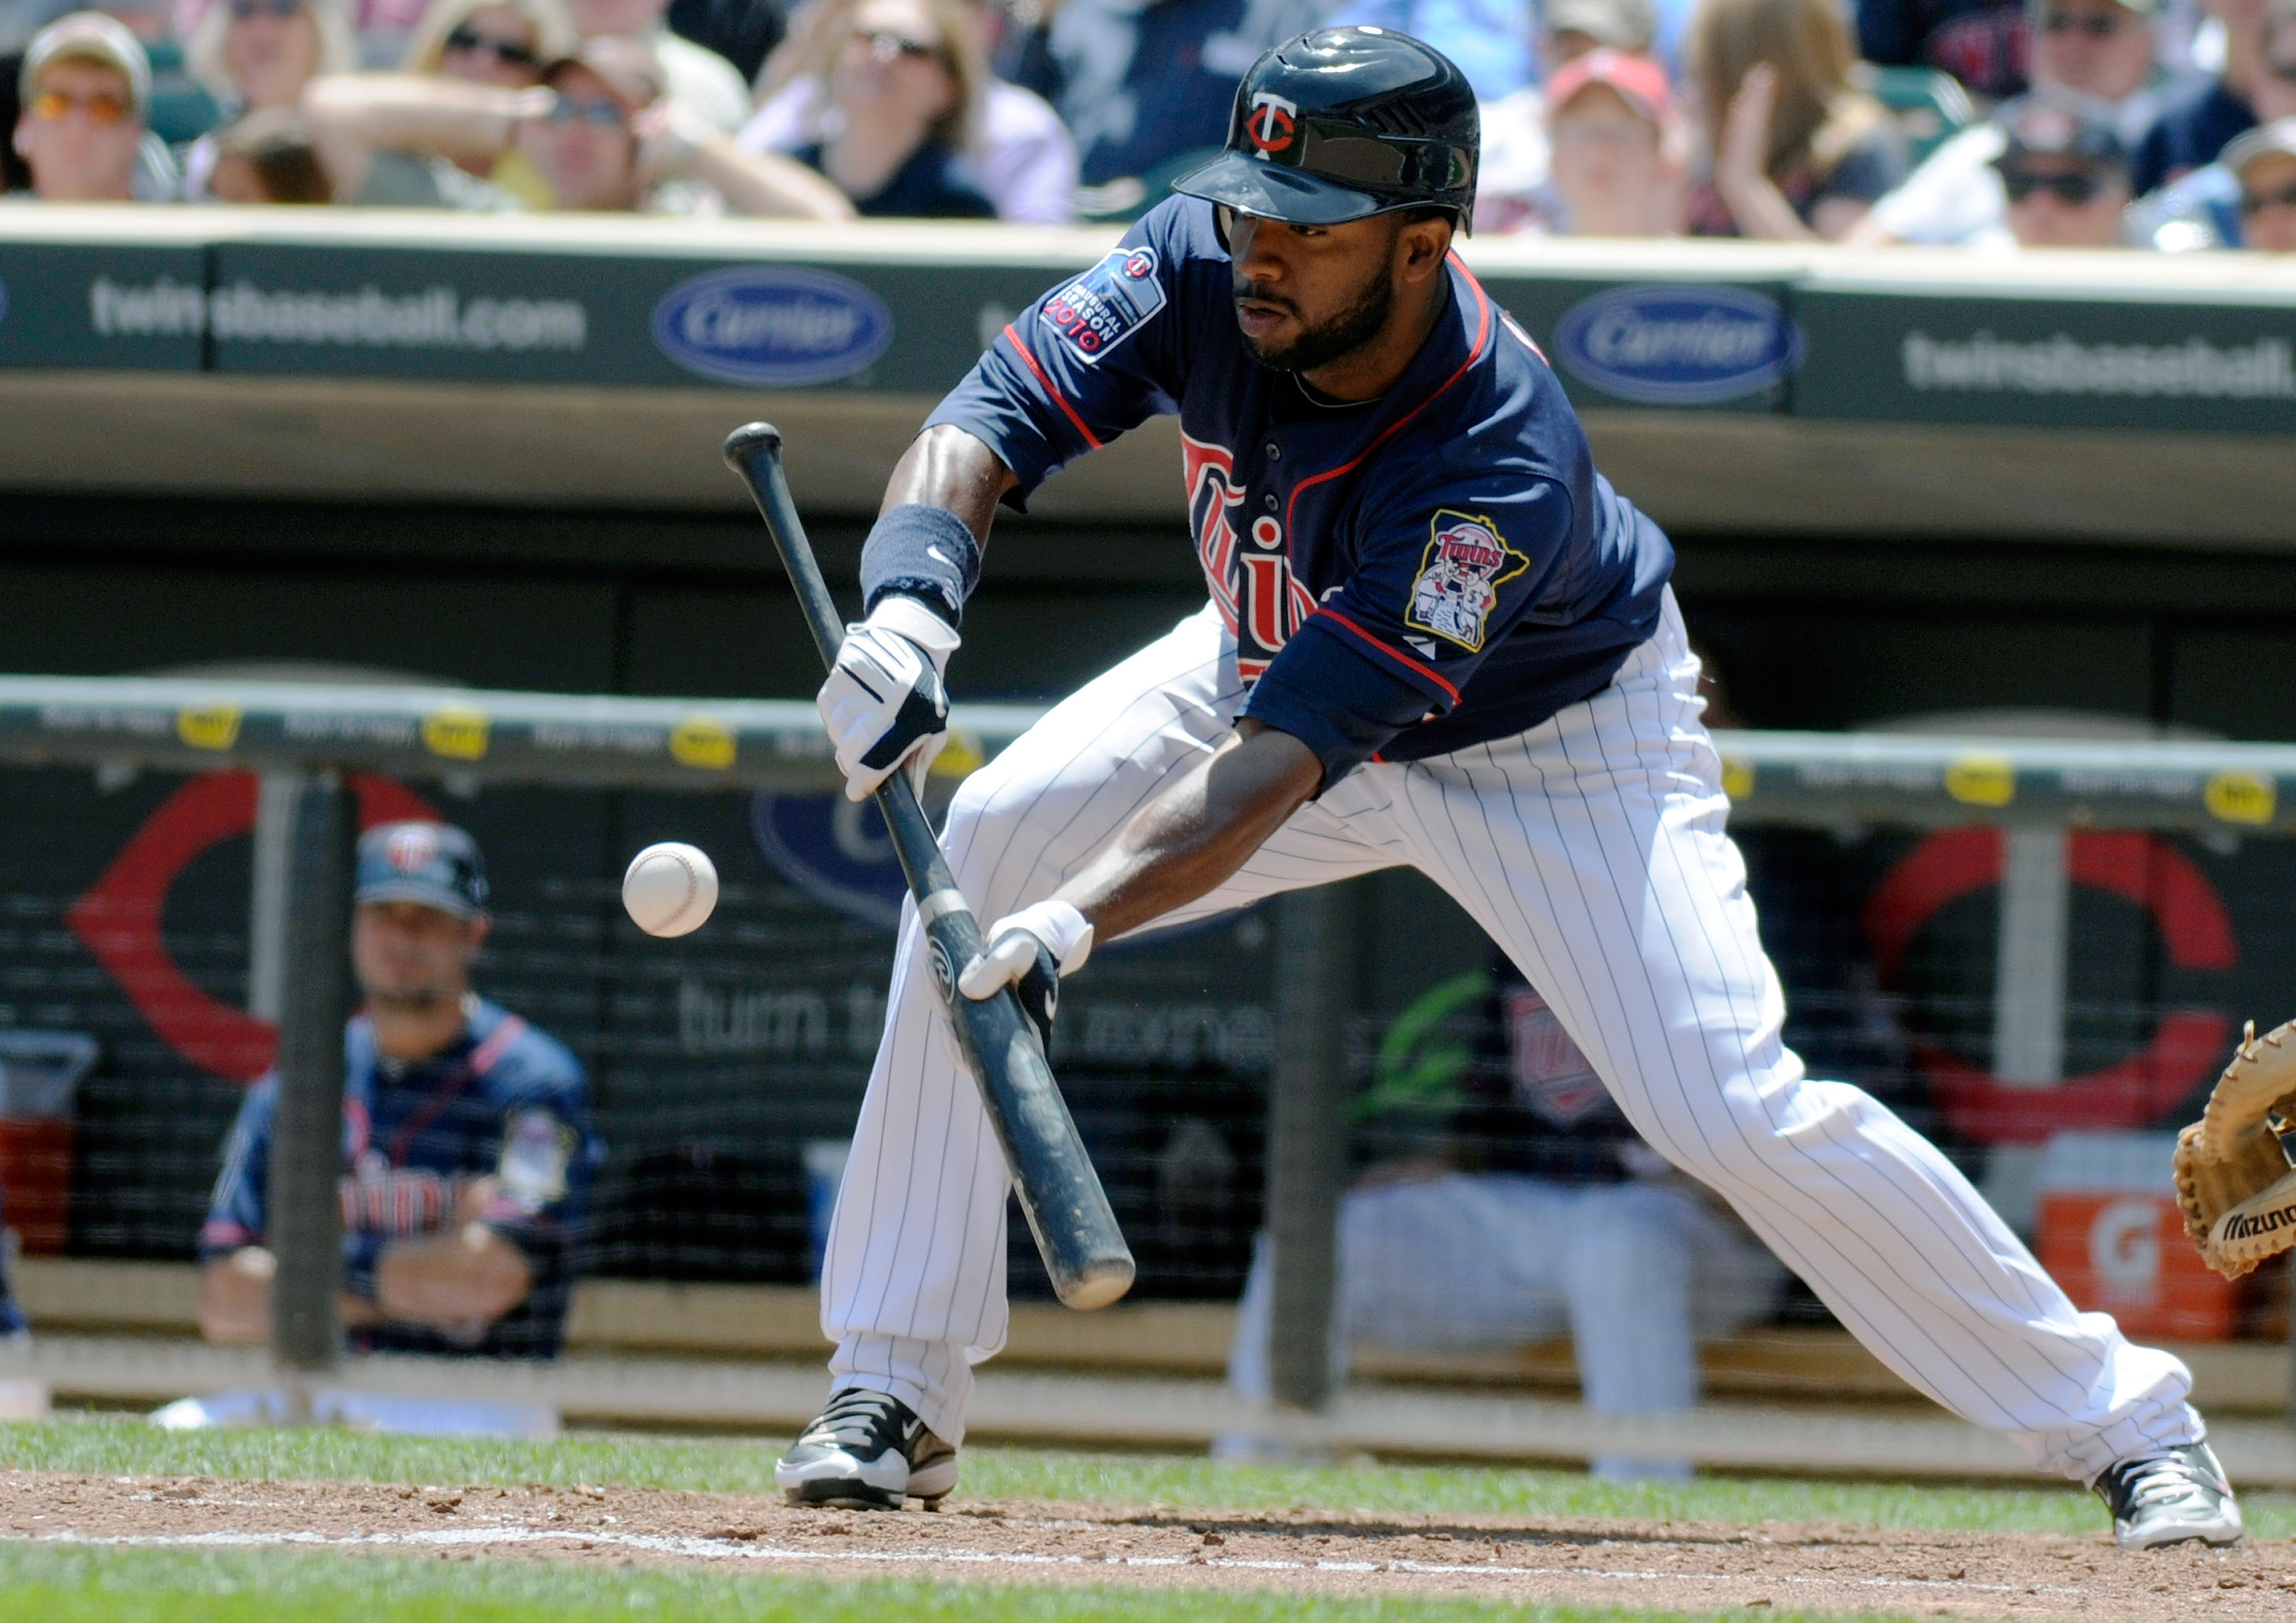 MINNEAPOLIS, MN - JUNE 30: Denard Span #2 of the Minnesota Twins lays down a sacrifice bunt in the fifth inning against the Detroit Tigers during their game on June 30, 2010 at Target Field in Minneapolis, Minnesota. (Photo by Hannah Foslien /Getty Images